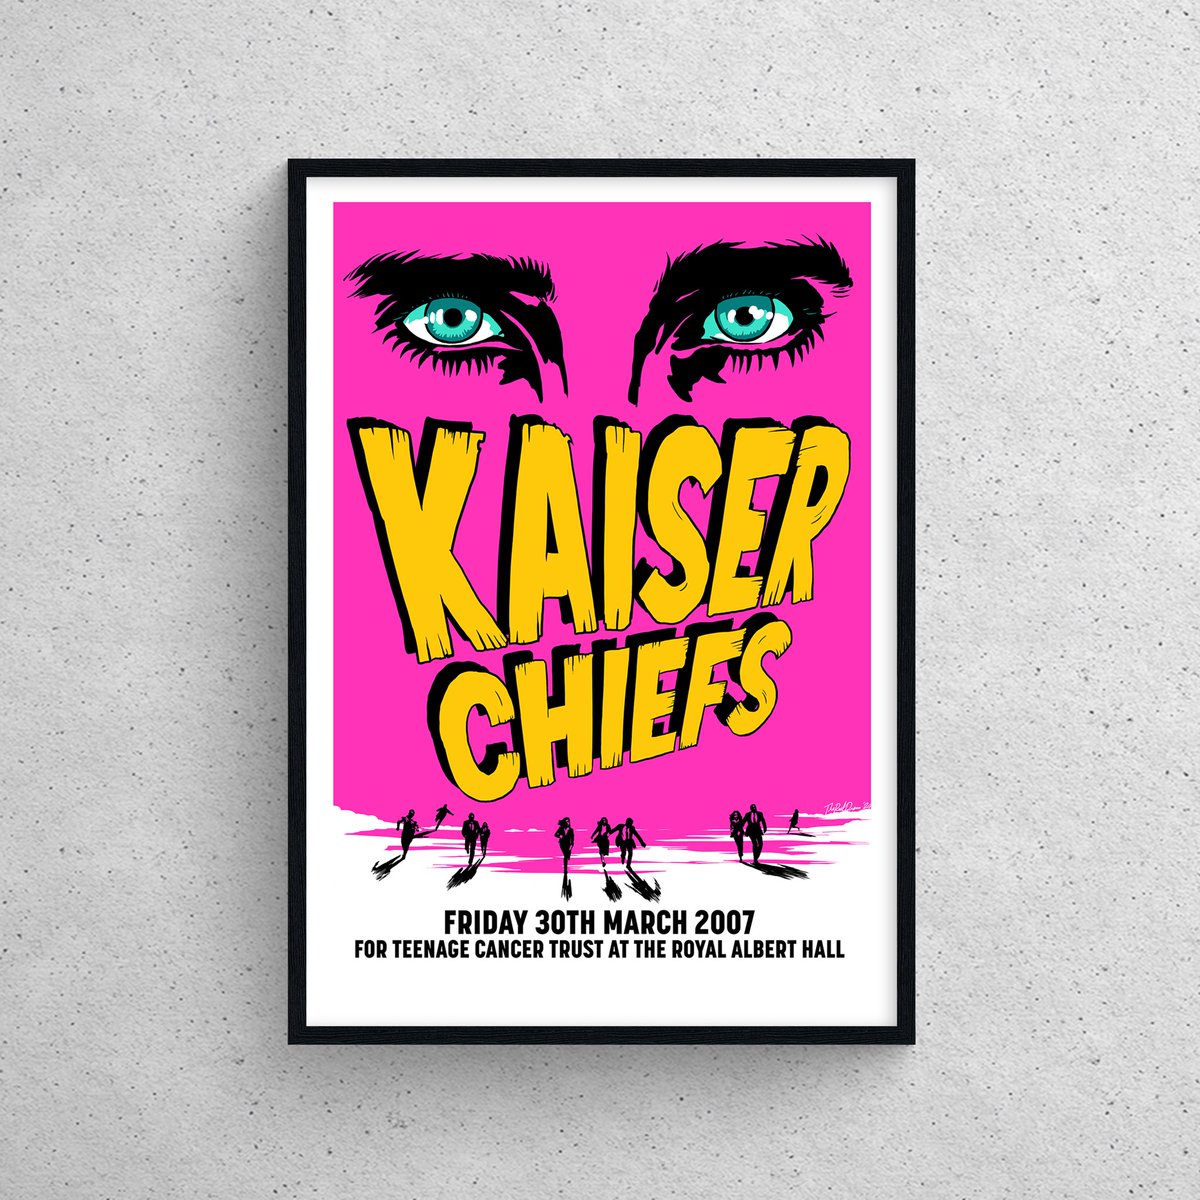 We are excited to announce that you can now purchase a newly produced gig poster from our 2007 @RoyalAlbertHall performance for @TeenageCancer to help raise funds for young people with cancer. (1/2)